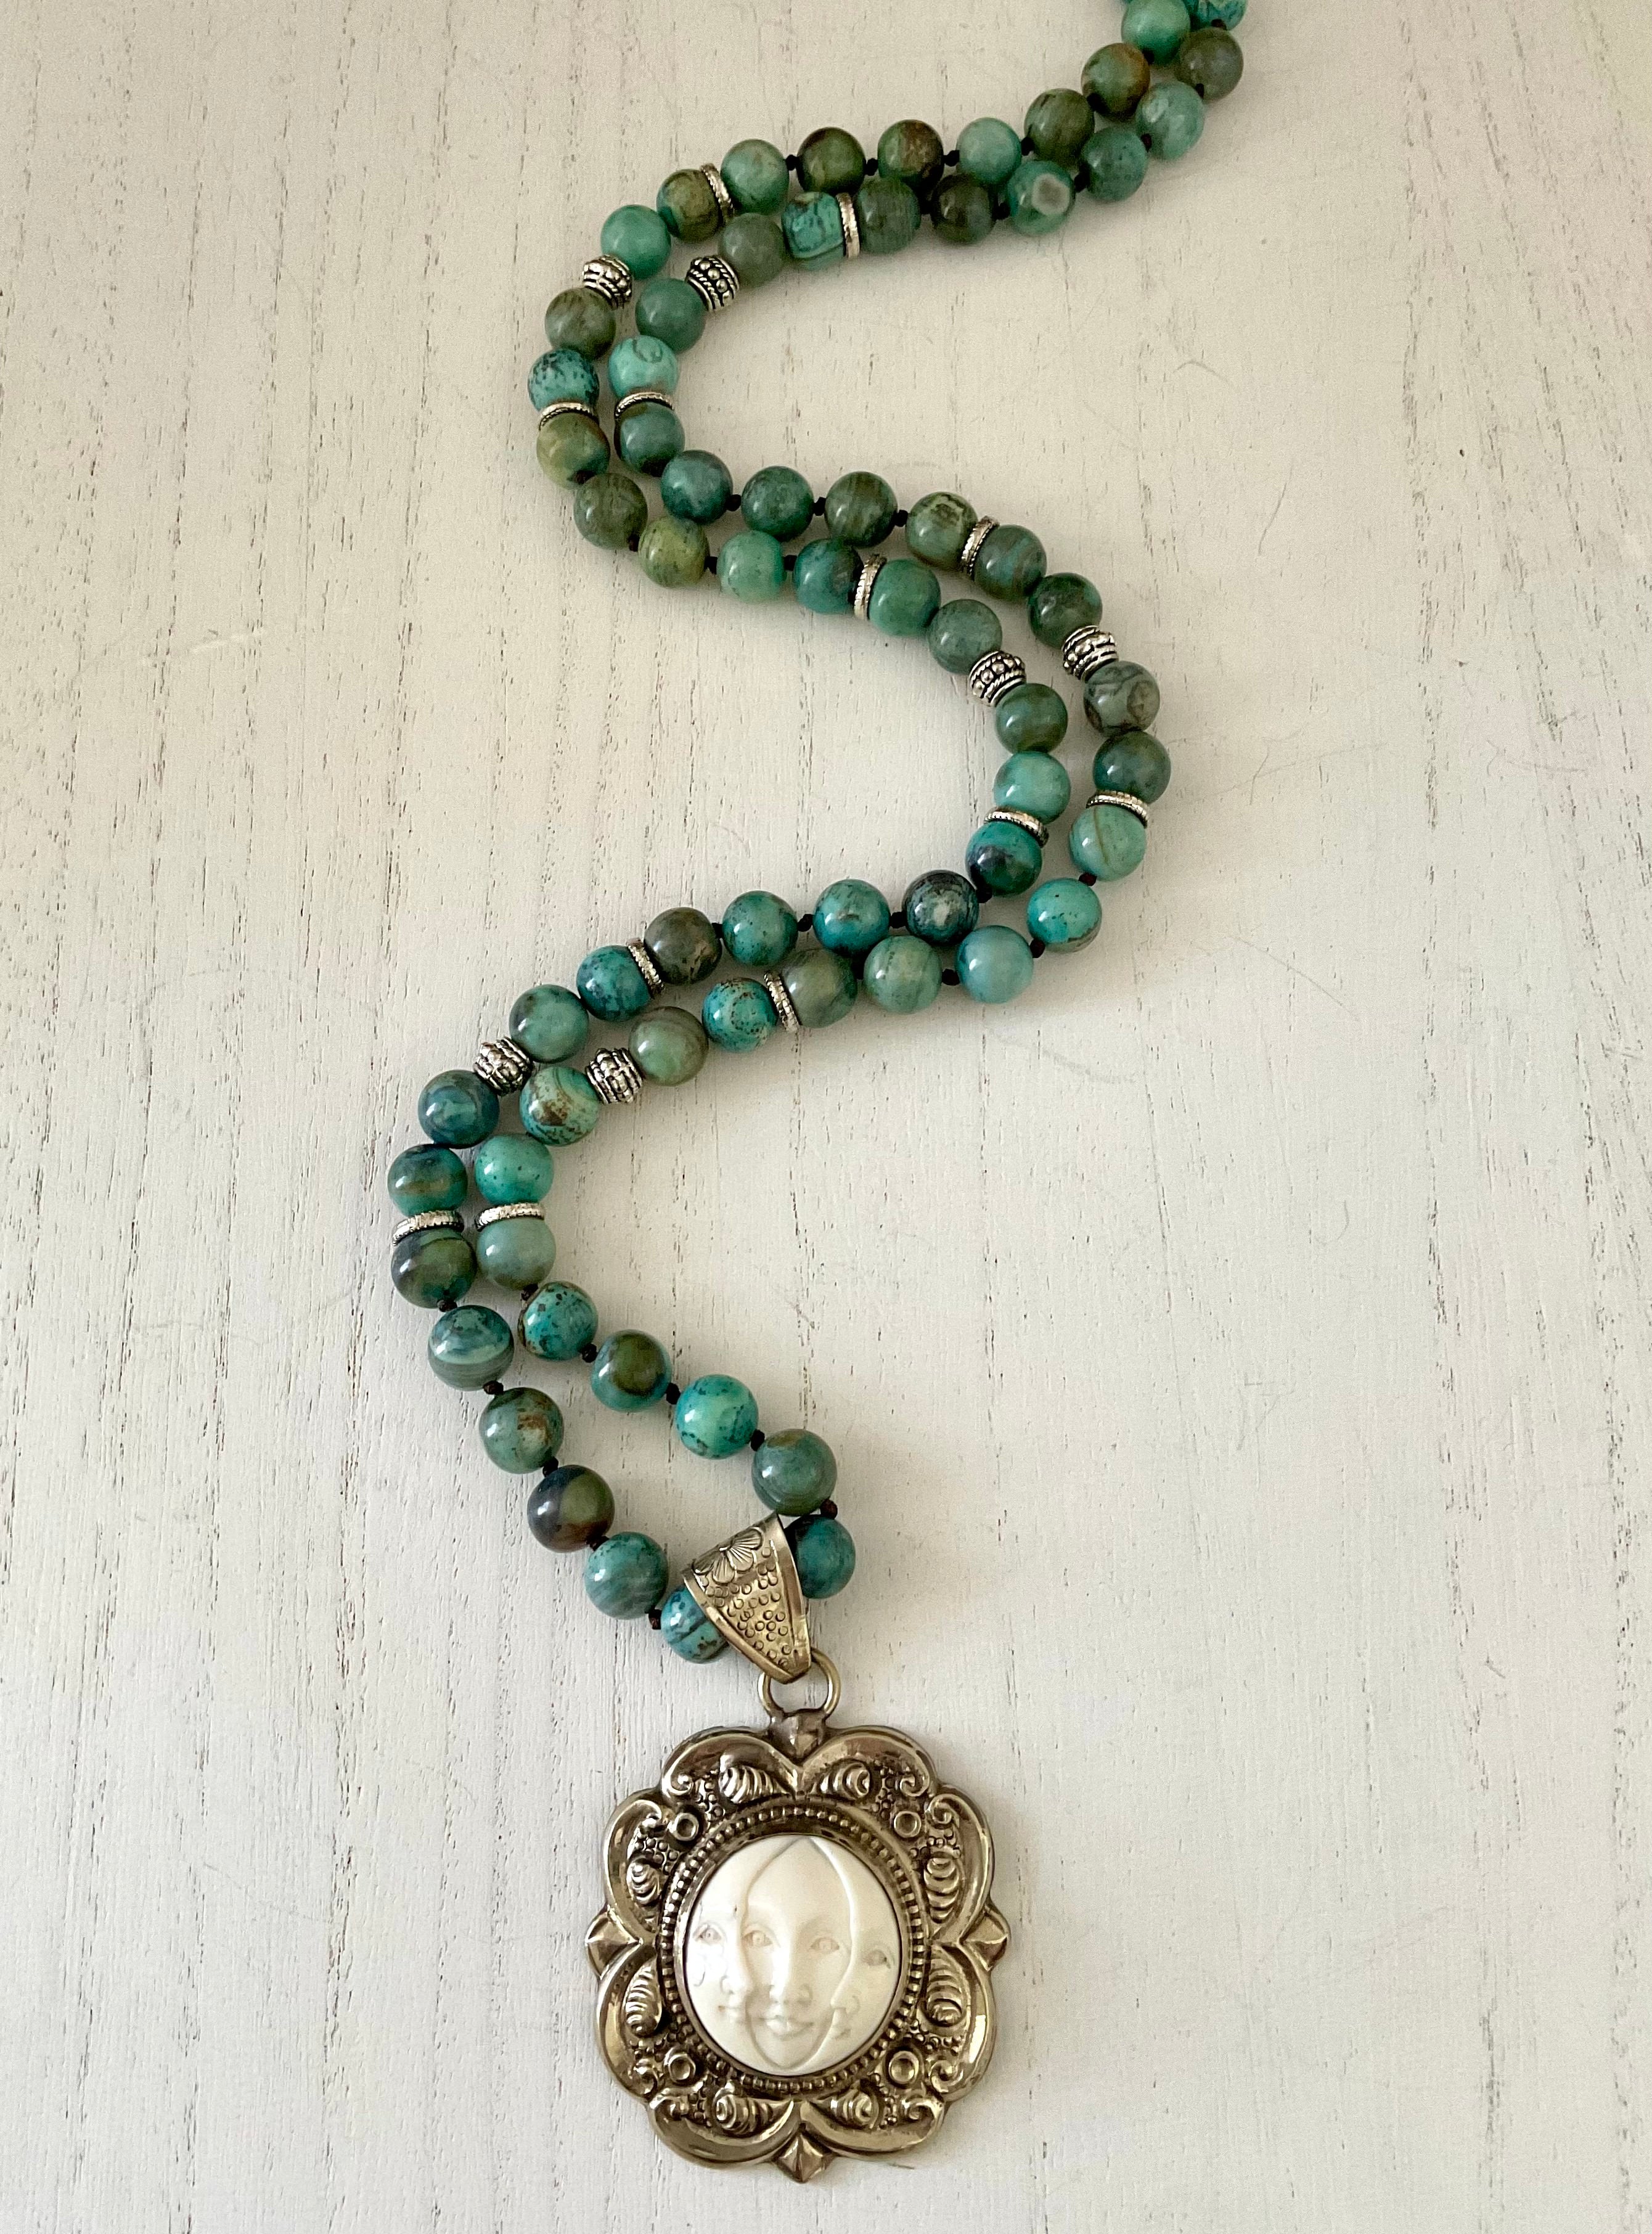 Hand Knotted Beaded Necklace with Moon Pendant